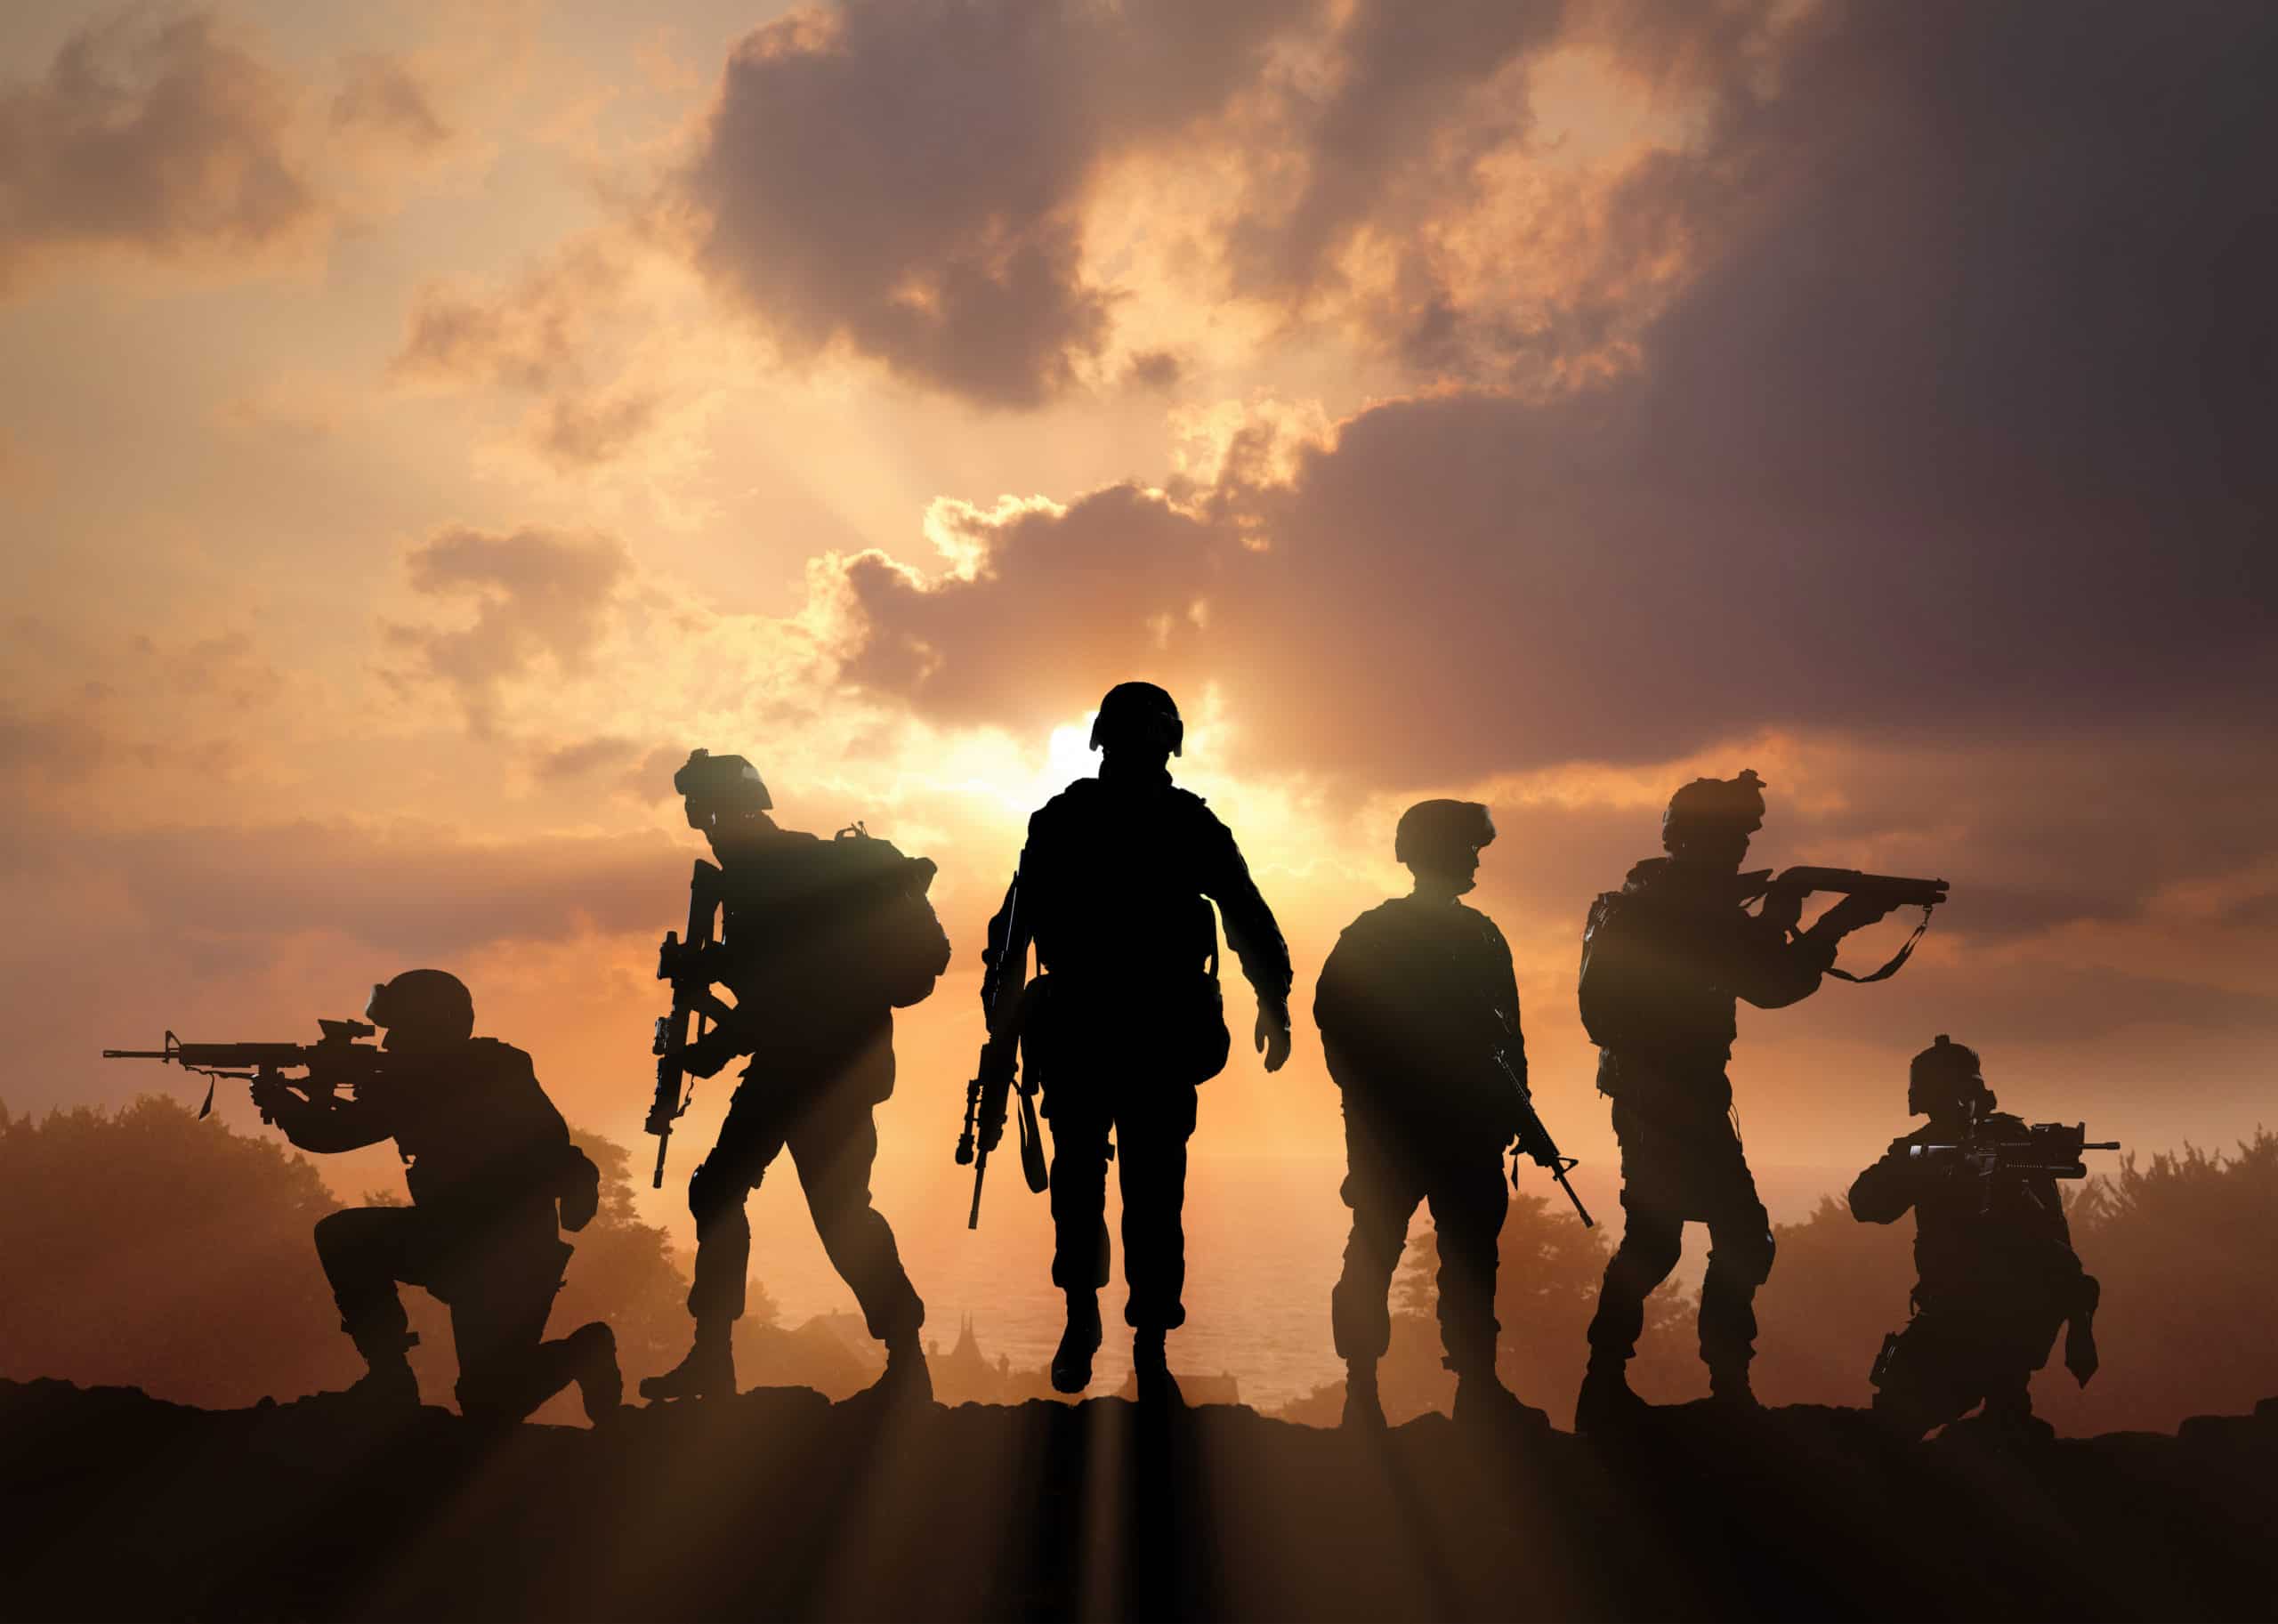 Six military silhouettes